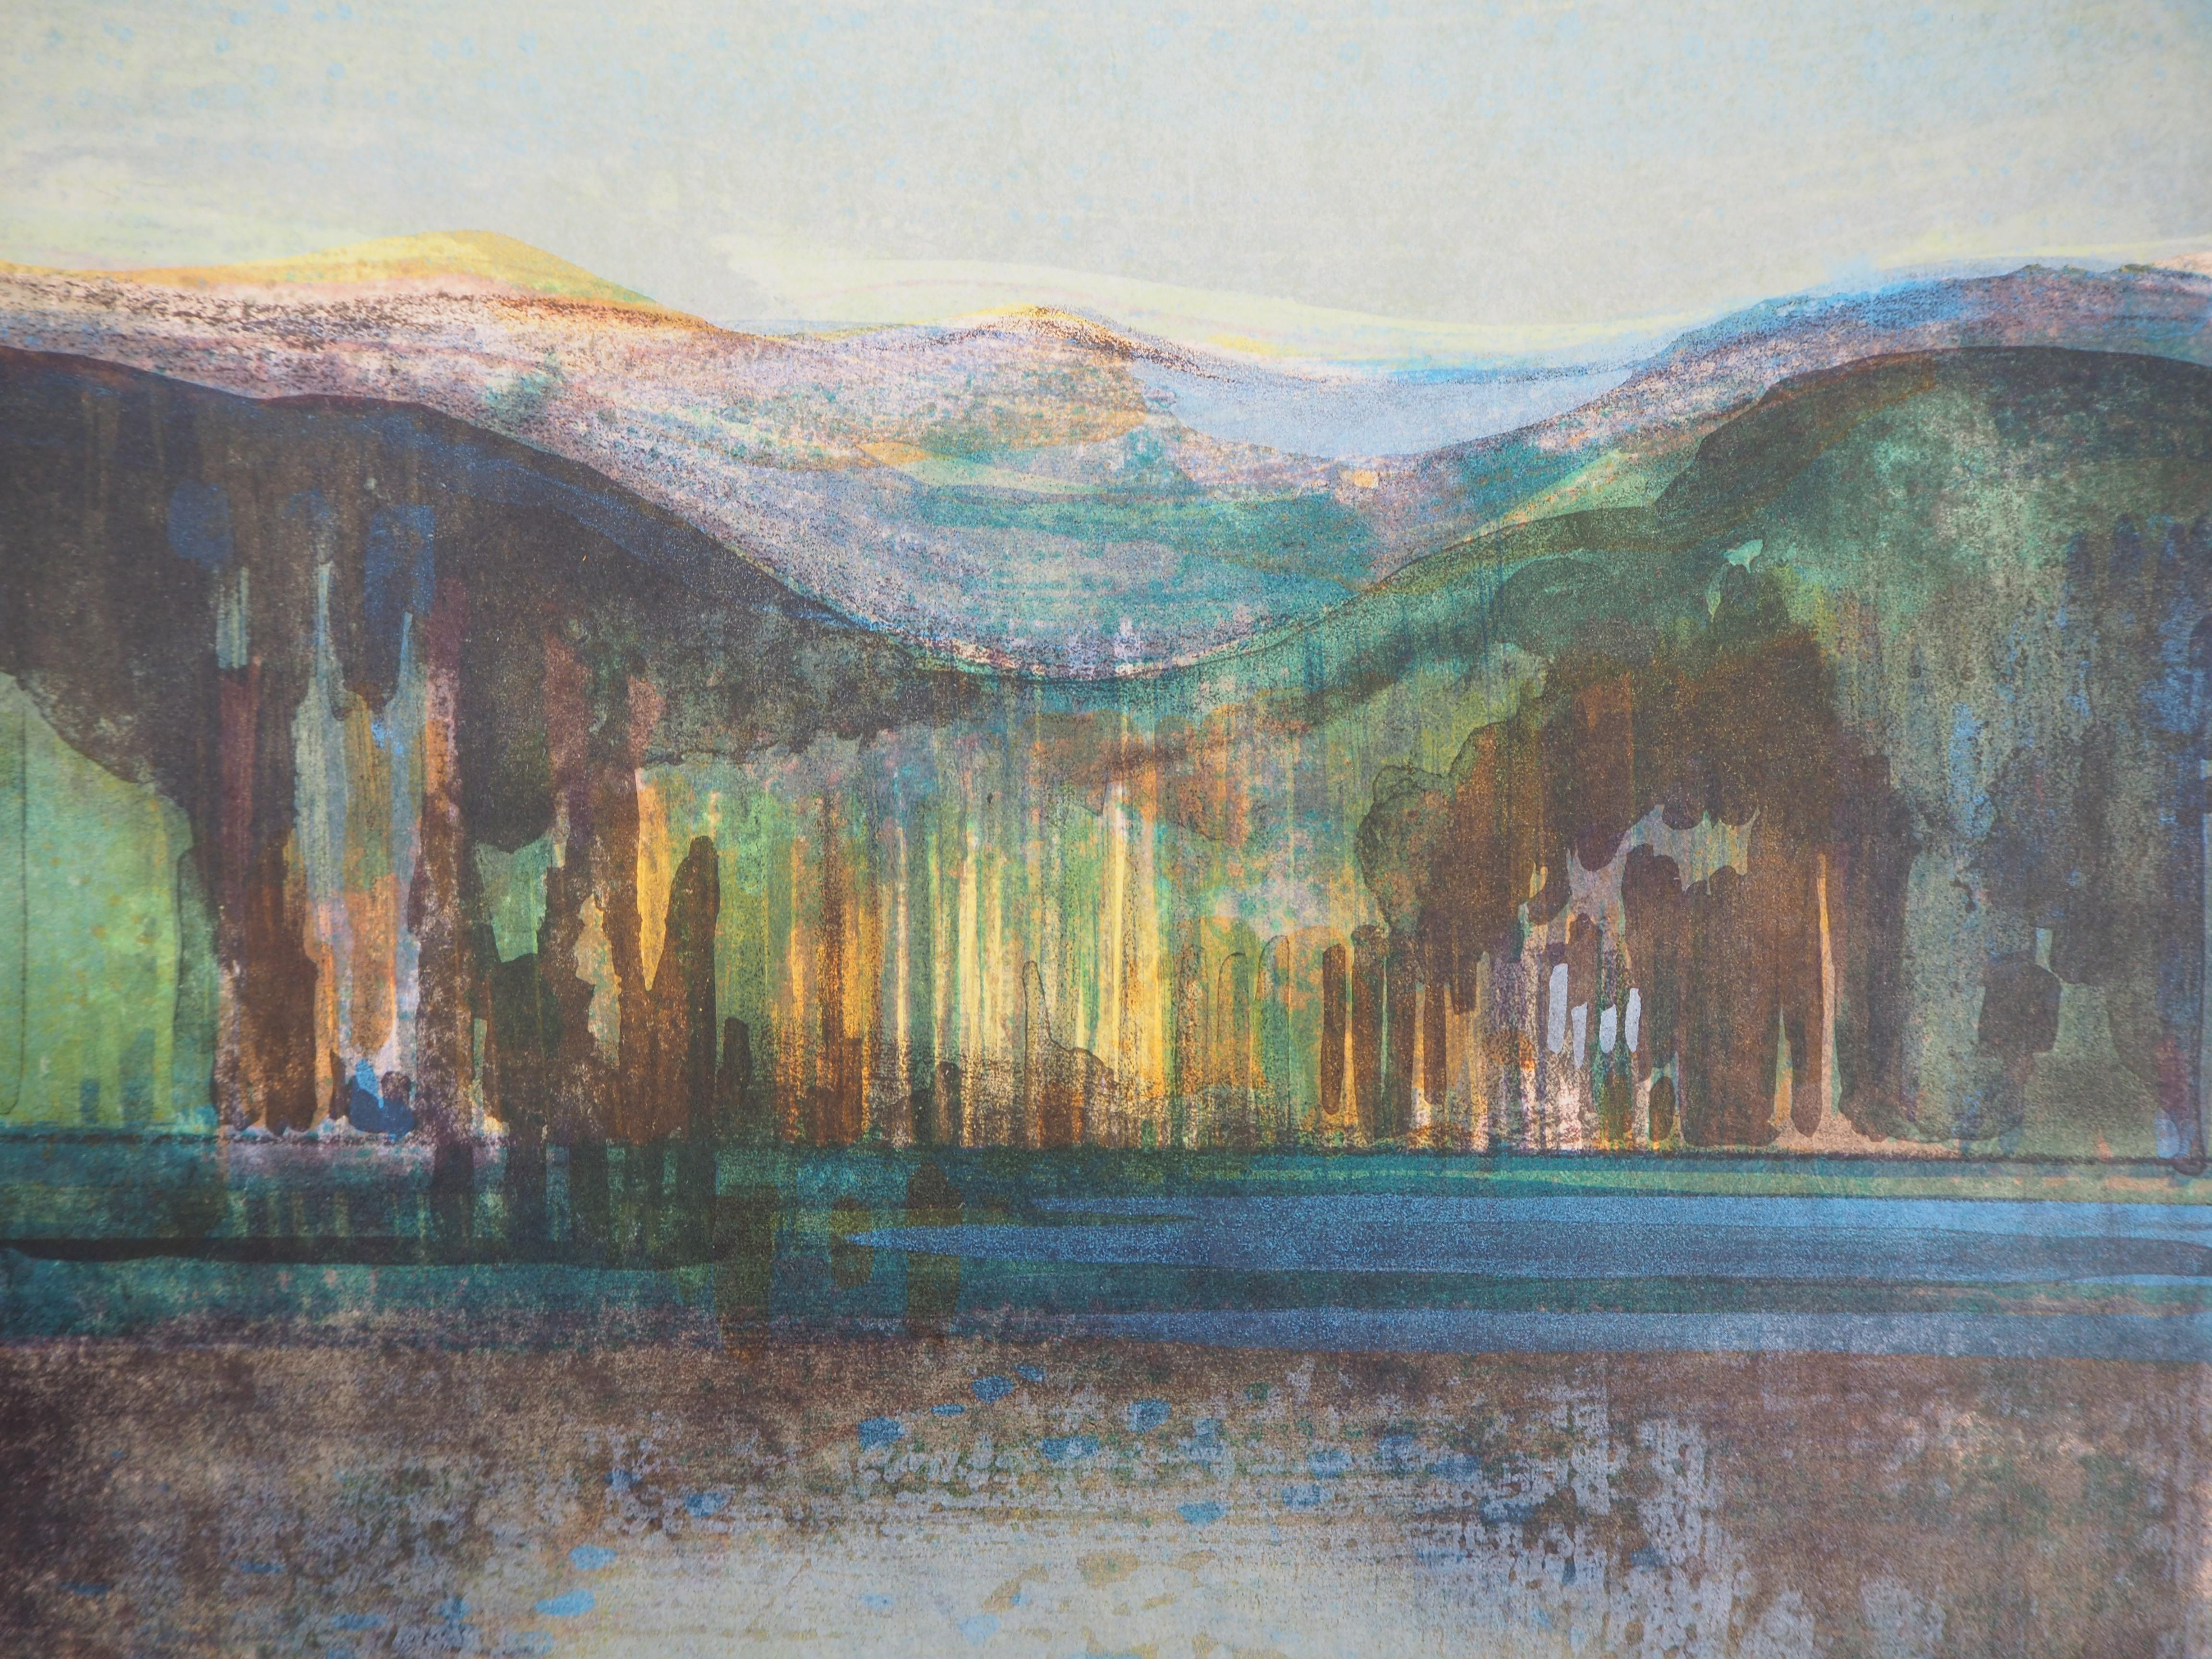 Rivers in France : Sunset on the Lake - Original handsigned lithograph - Modern Print by Camille Hilaire